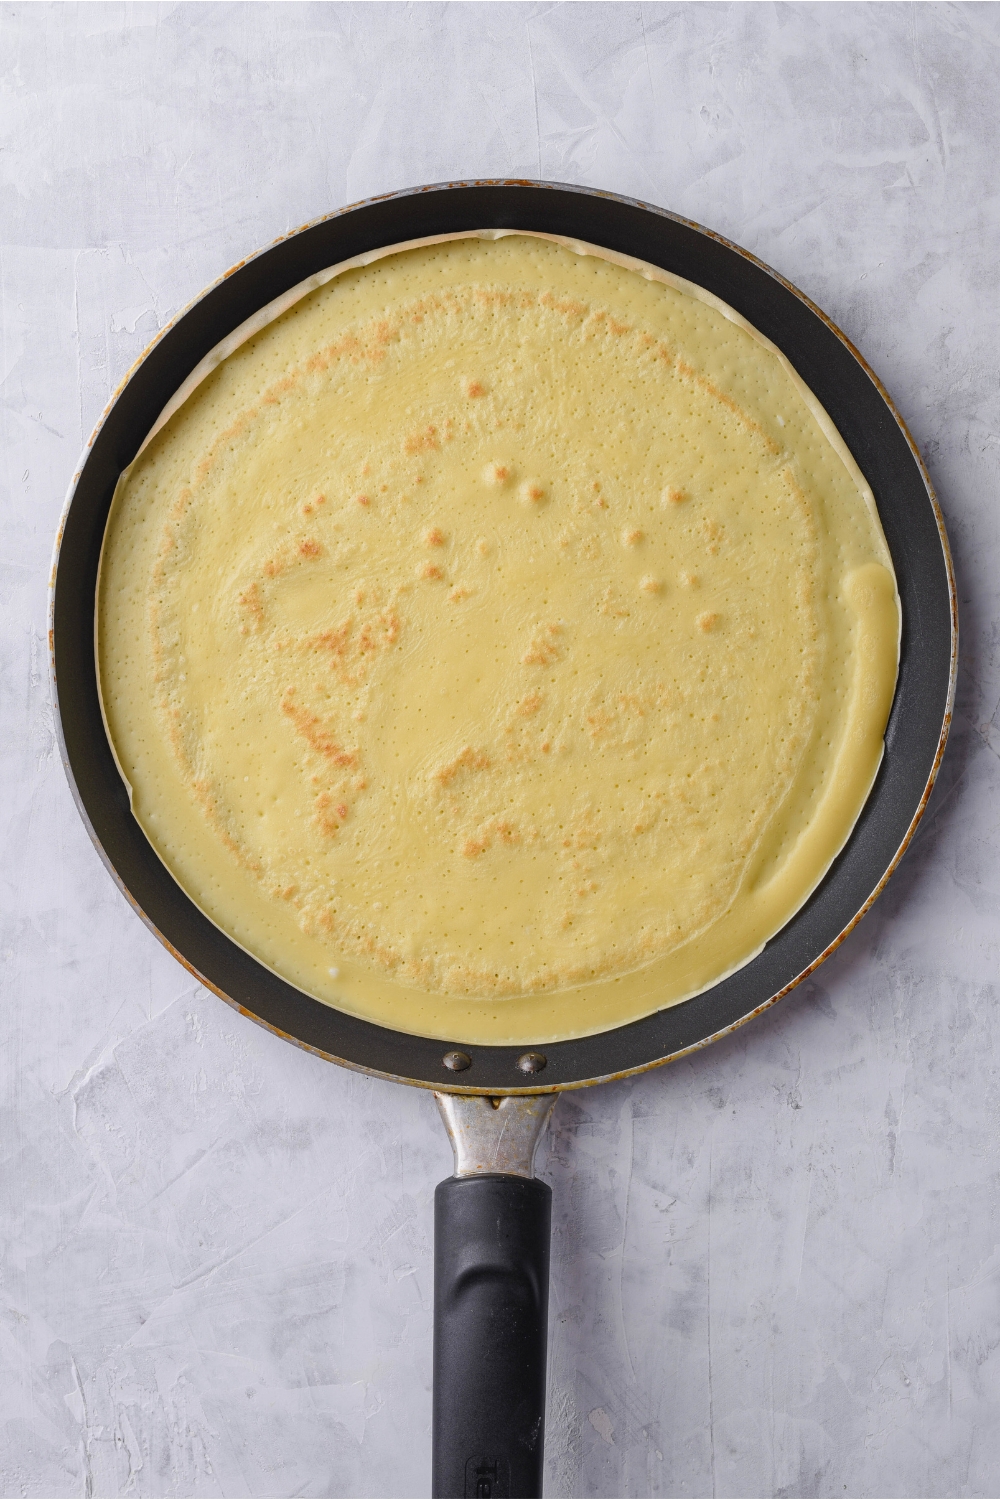 A crepe pan cooking a crepe.